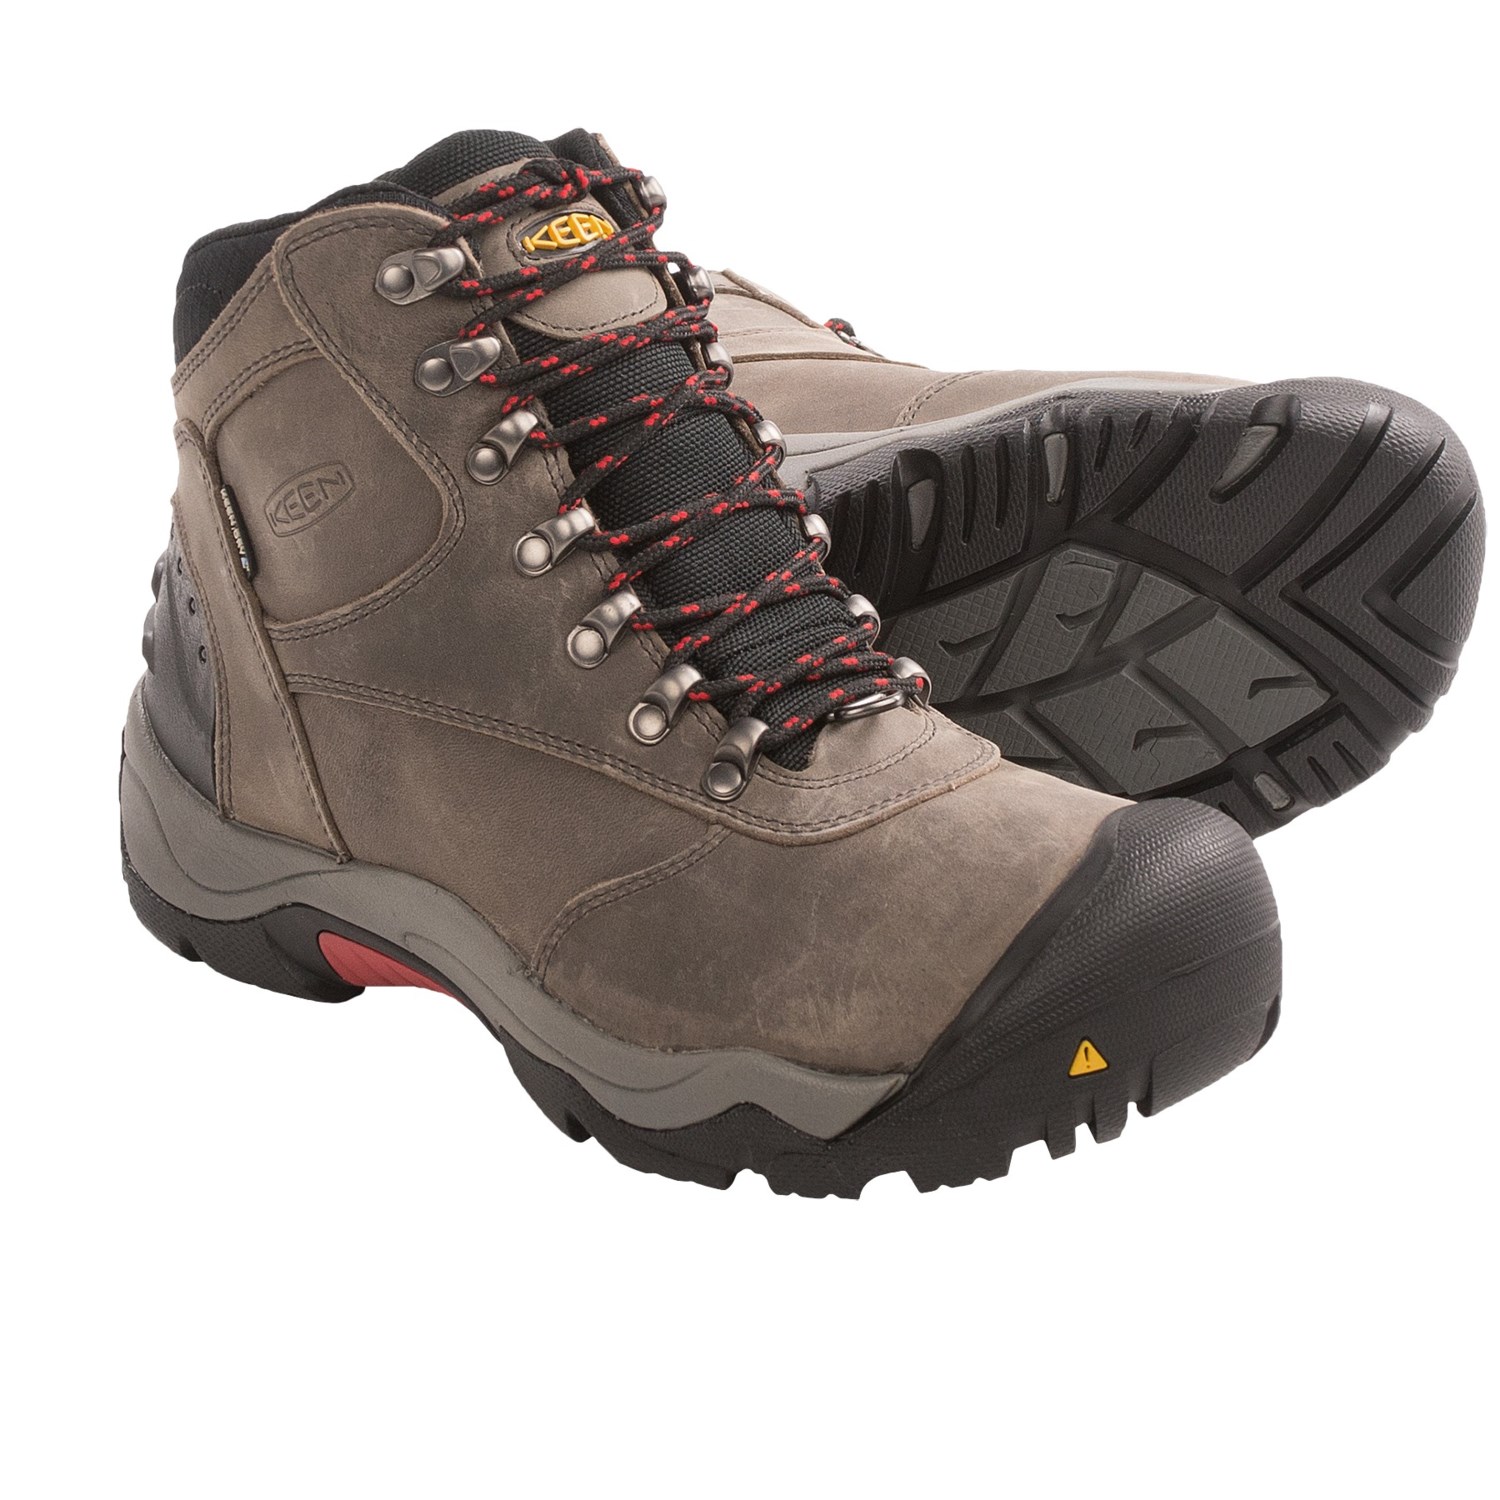 Keen Revel II Snow Boots (For Men) 7213Y - Save 30%